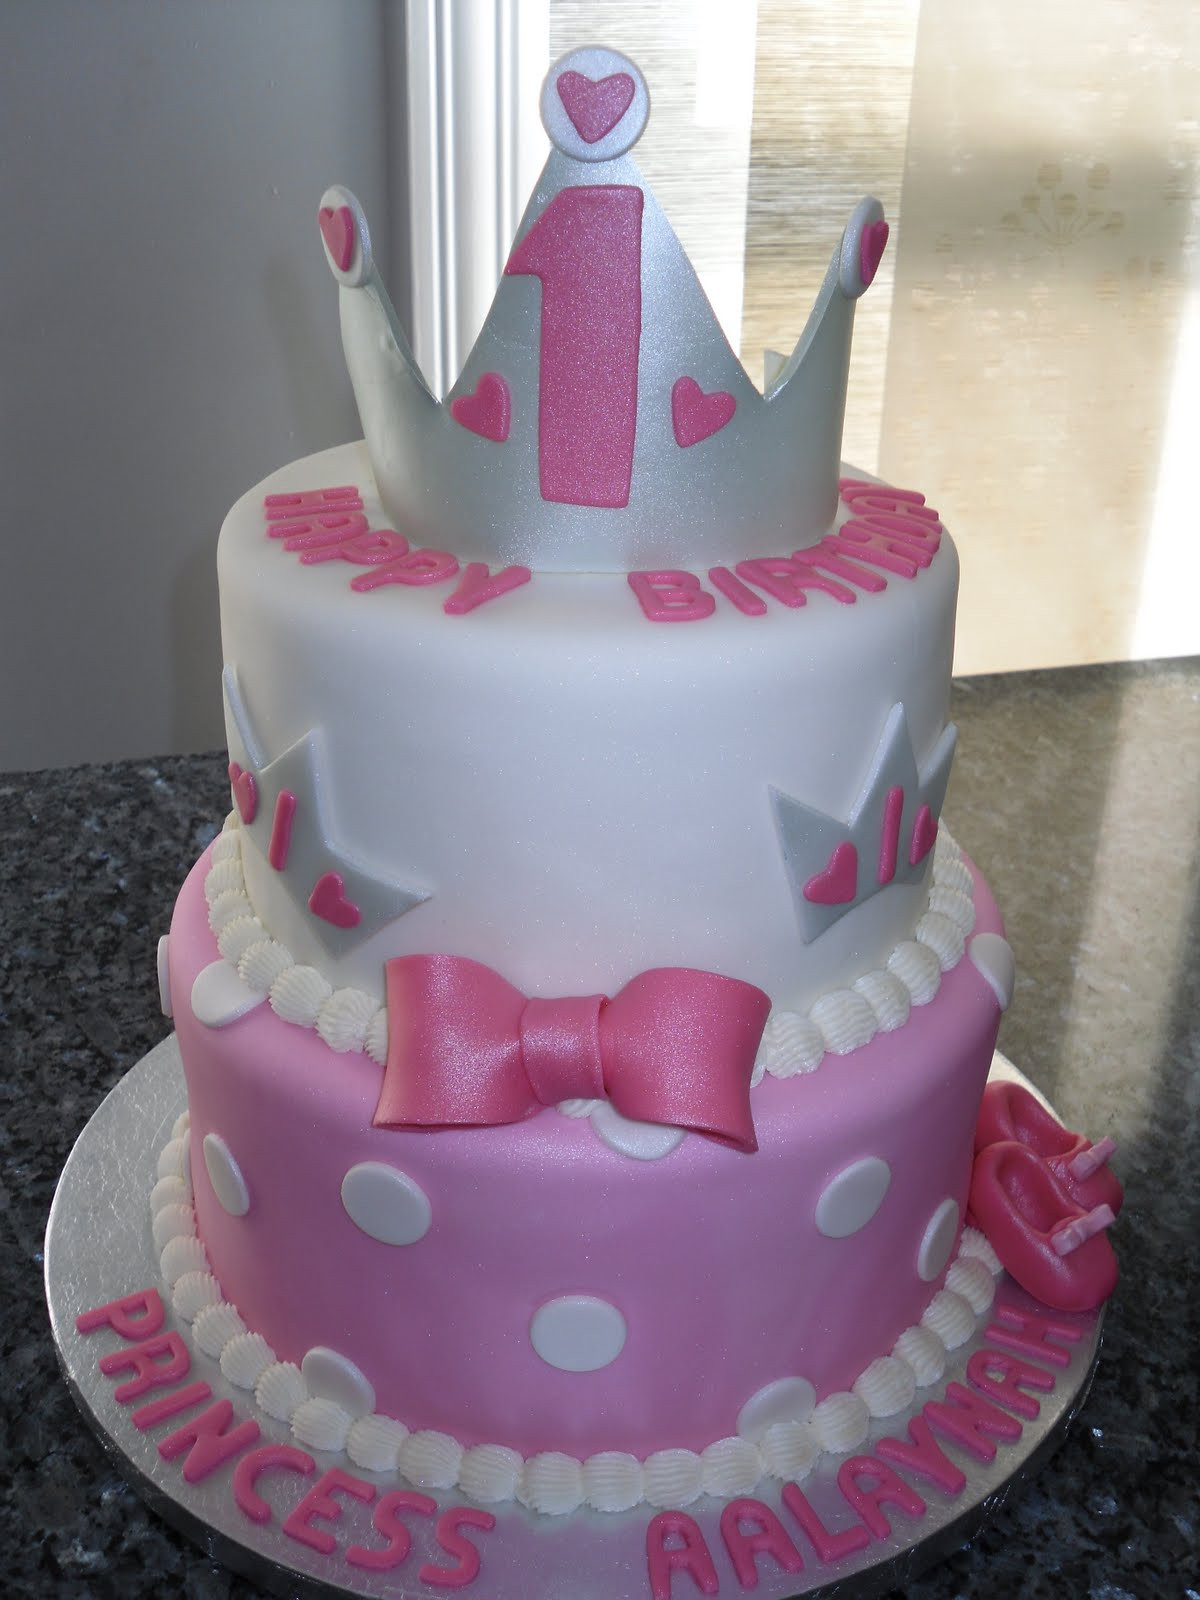 1 Year Old Birthday Cake
 Carat Cakes Two Very Special e Year Old Birthdays